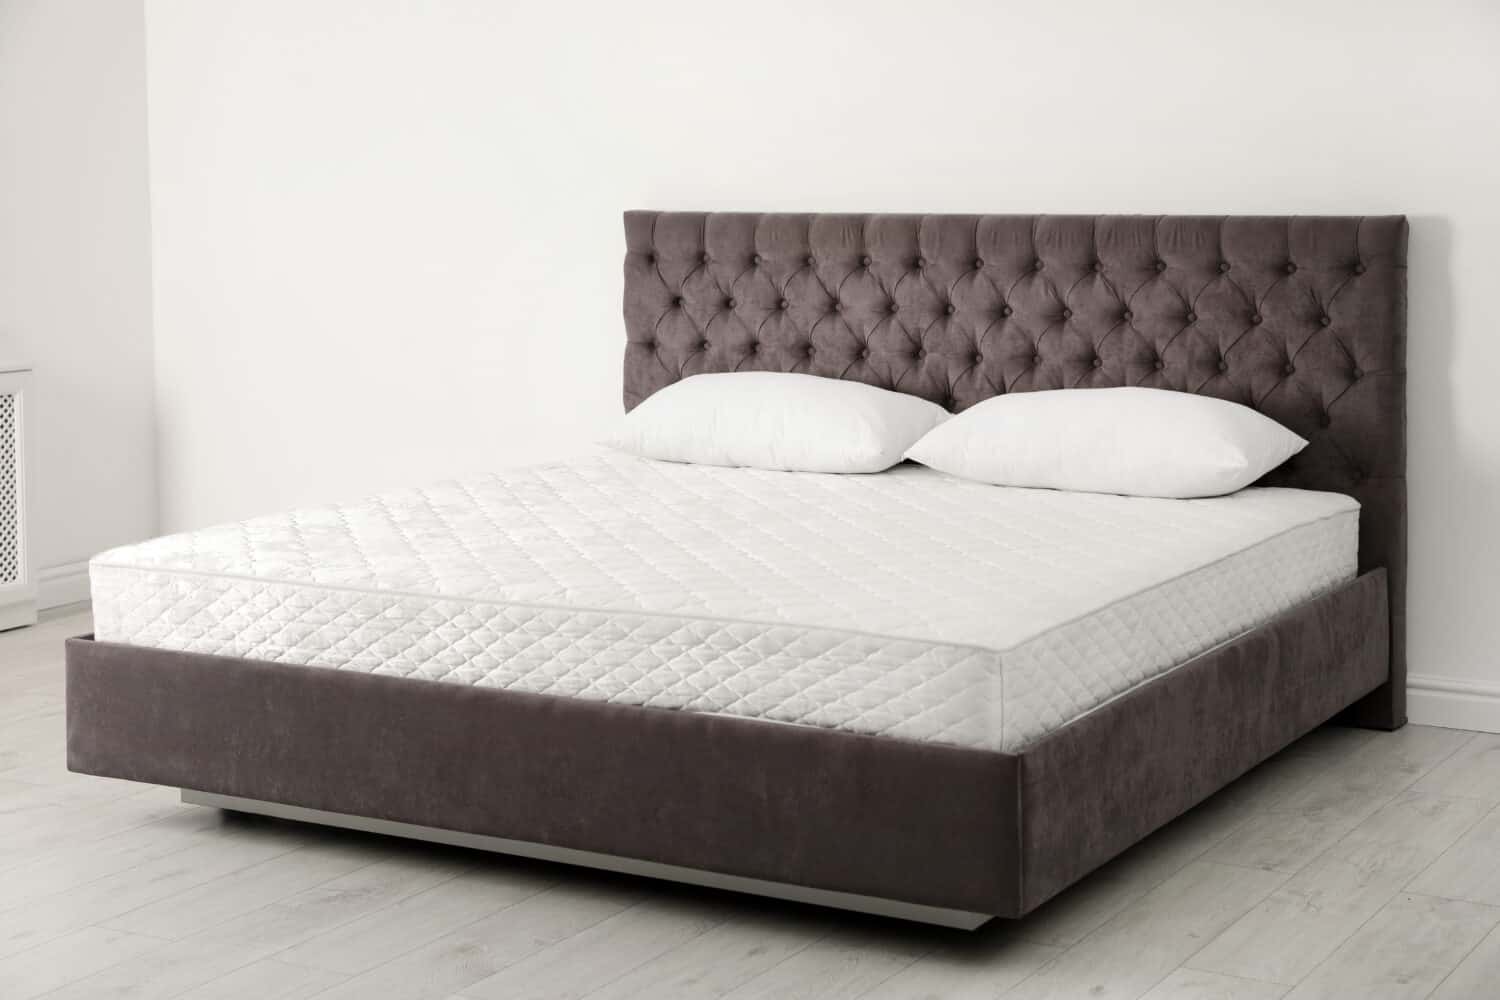 Comfortable bed with new mattress near wall in room. Healthy sleep